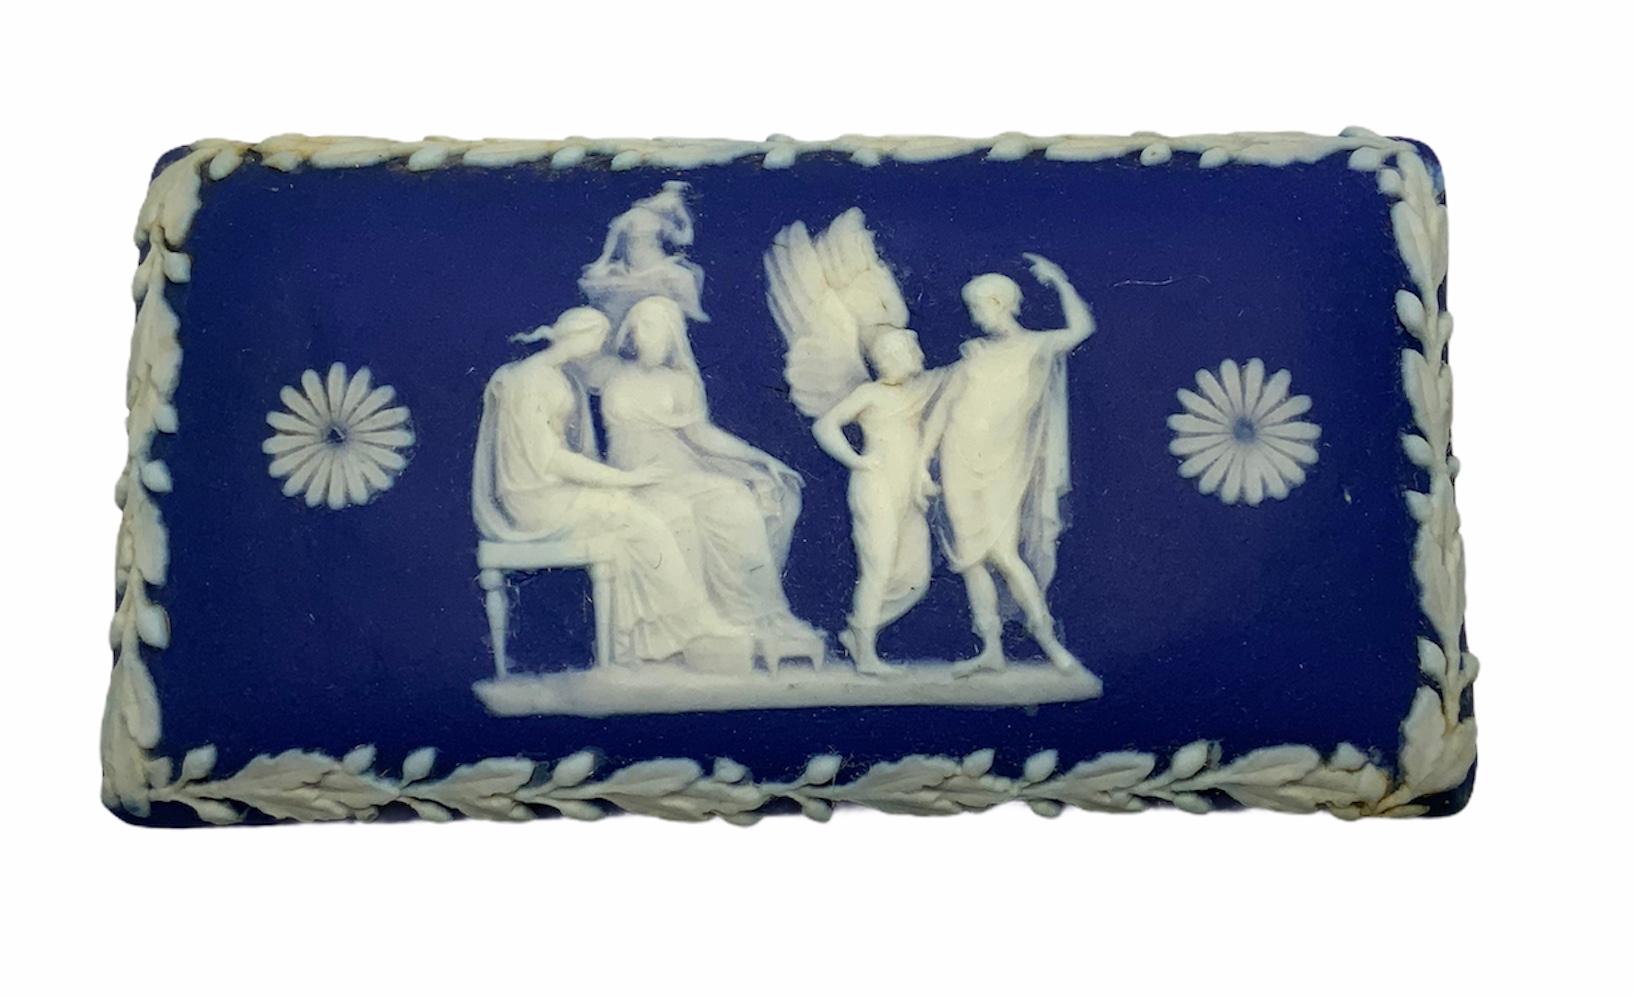 This is a rectangular jasperware trinket box depicting a scene with a white relief technique of two Greek or Roman ladies sitting in a settee while another lady is over them in heaven. In the same scene, an angel appears in front of them talking